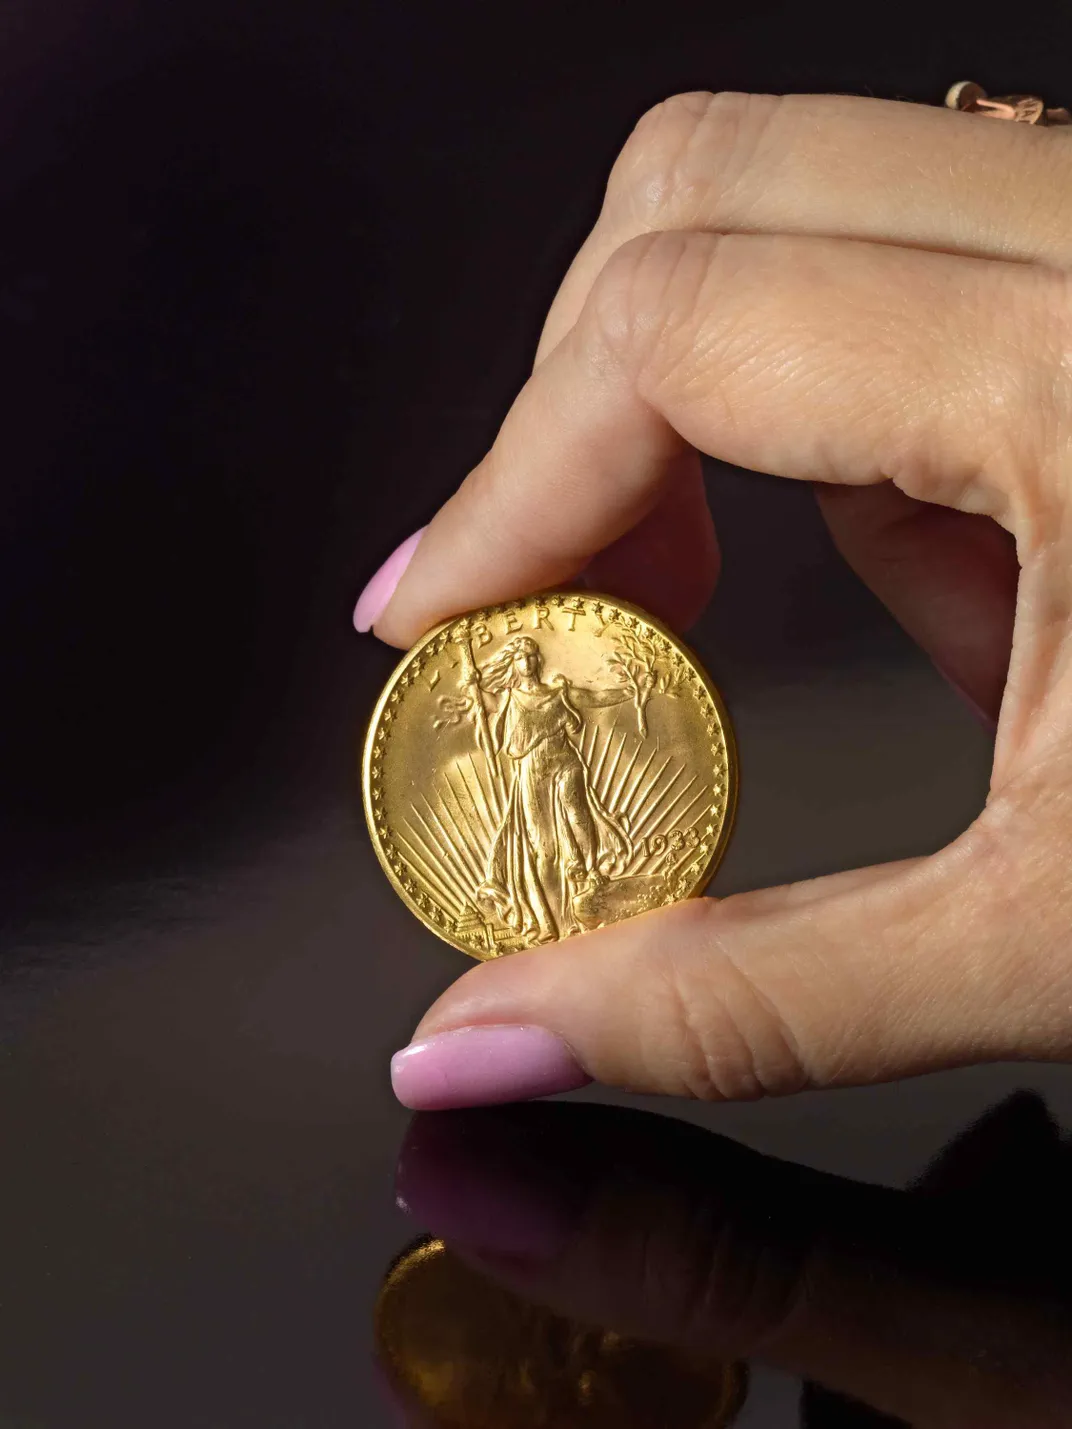 The World's Most Valuable Coin Sells at Auction for $18.9 Million, Smart  News